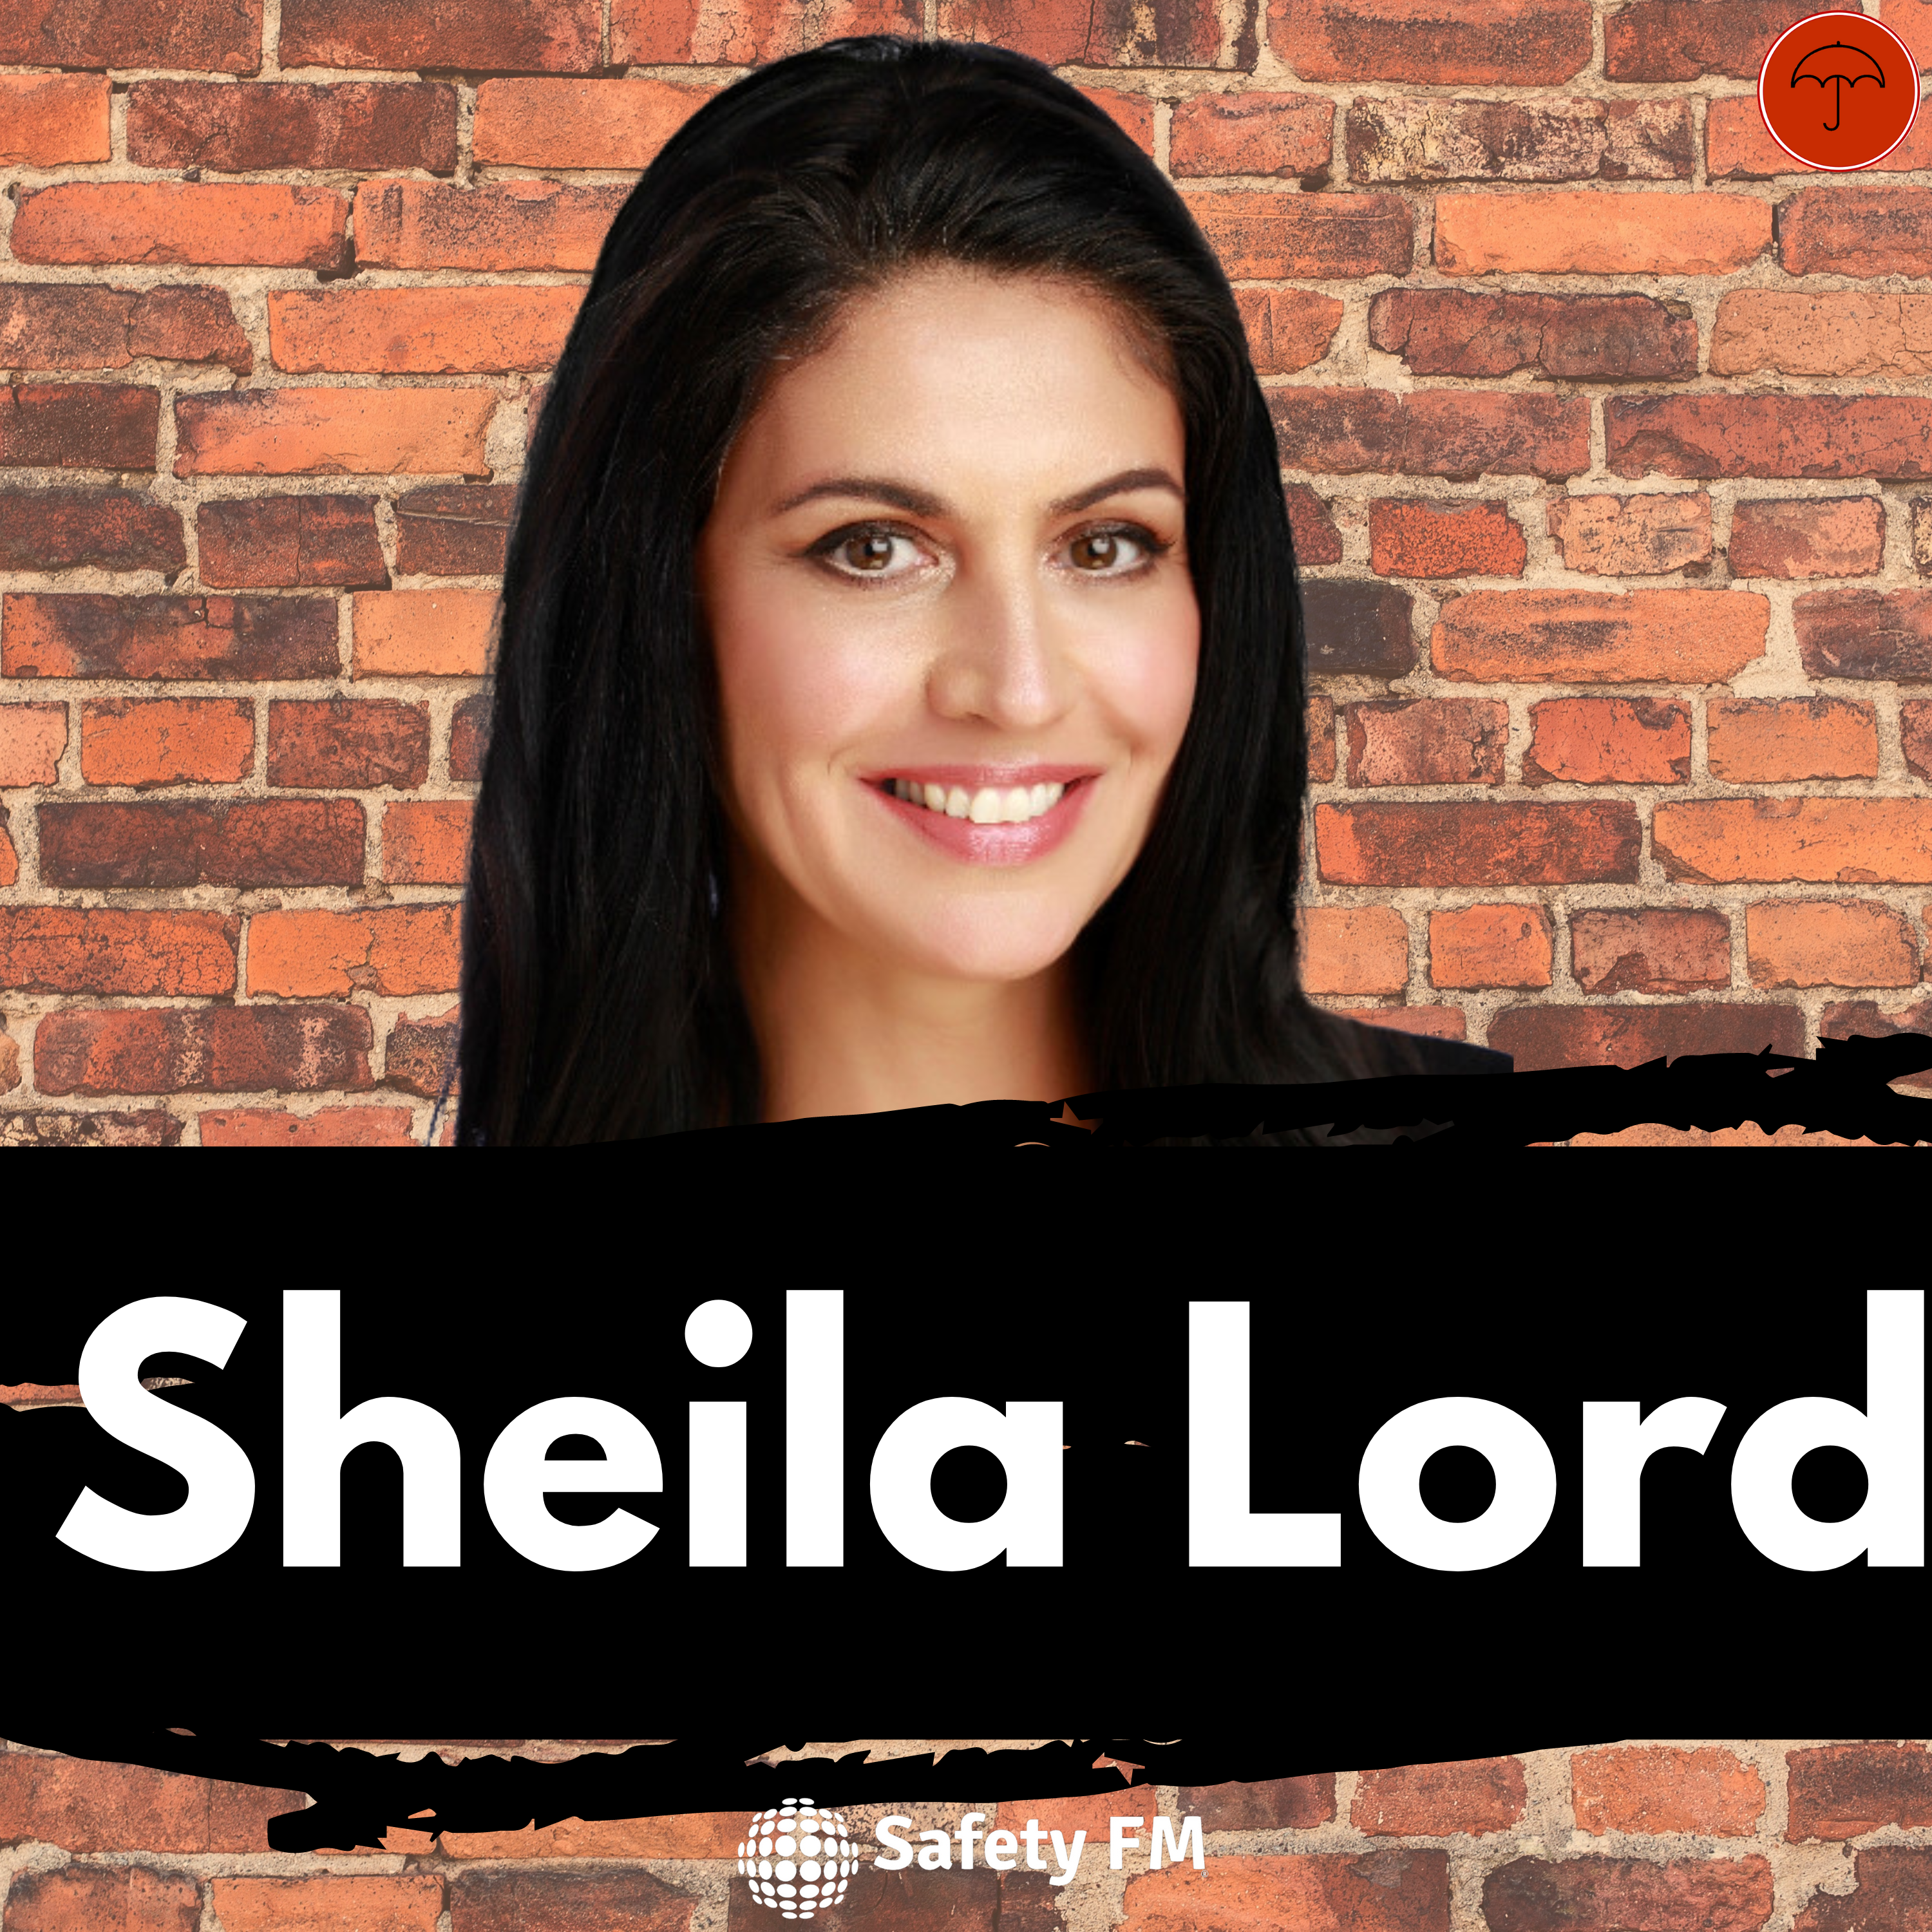 Rebranding Safety with Sheila Lord